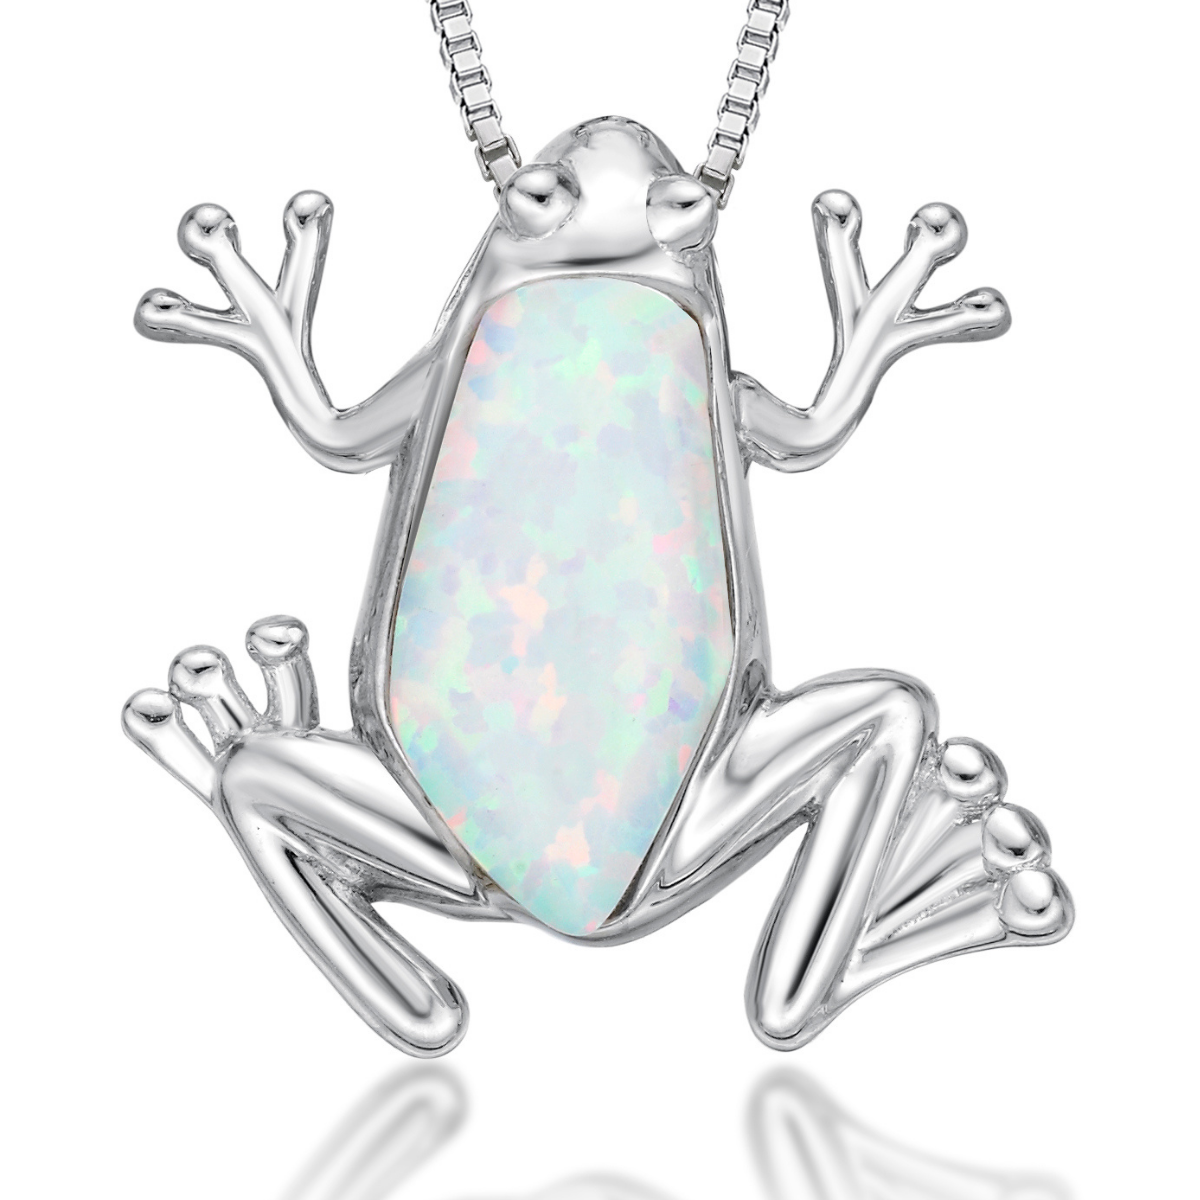 Lavari Jewelers Women's Created White Opal Frog Diamond Pendant with Lobster Clasp, Sterling Silver, .015 Cttw, 18 Inch Cable Chain